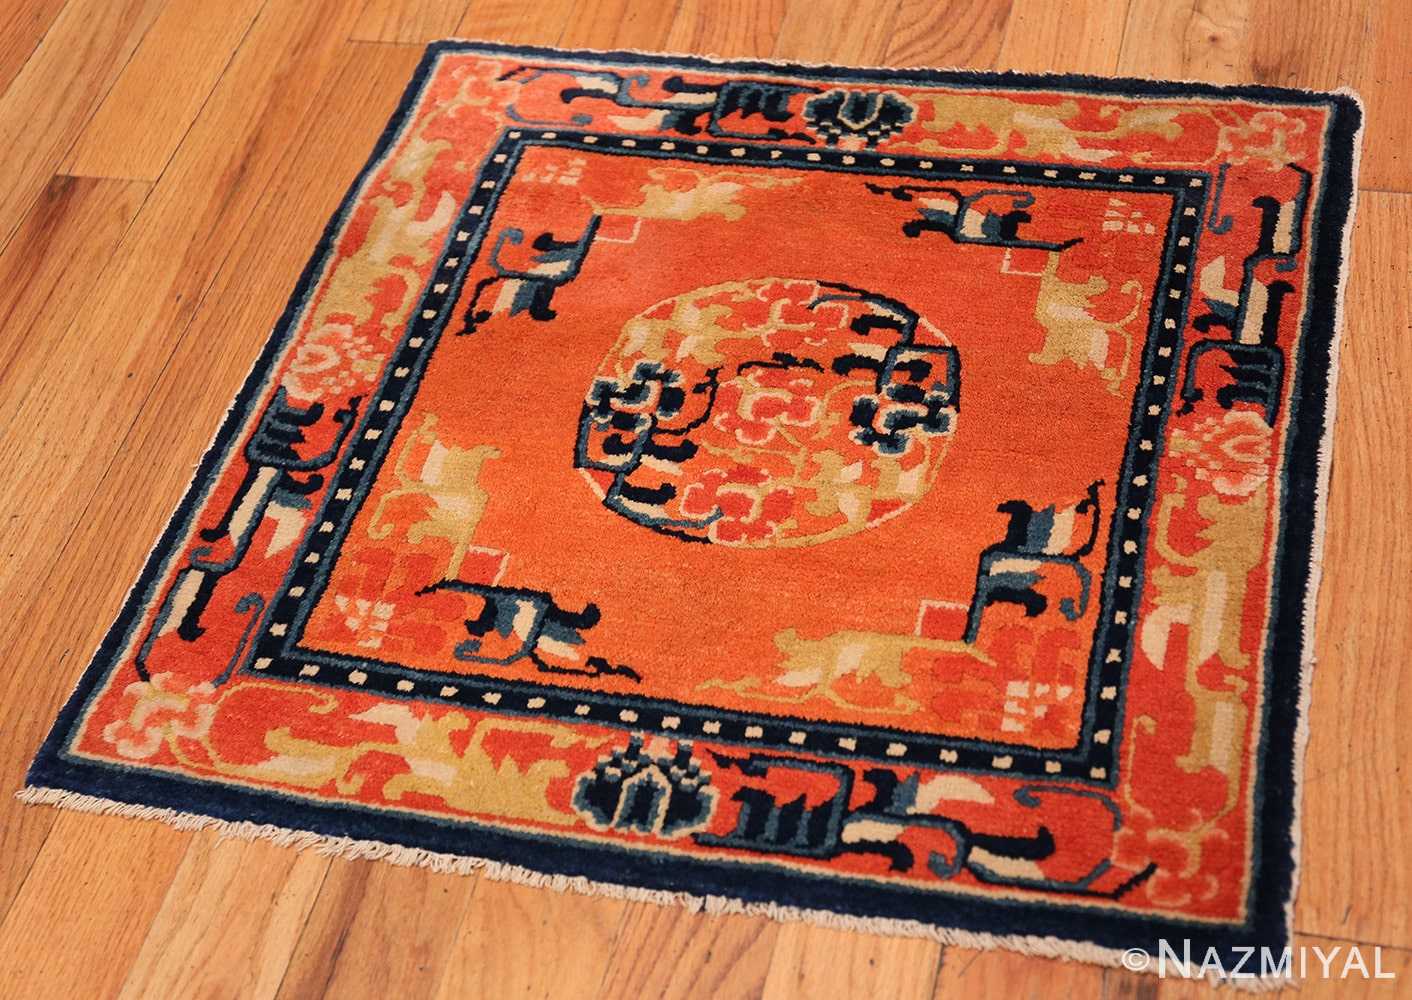 Full Square Small Scatter size Antique Chinese rug 44843 by Nazmiyal